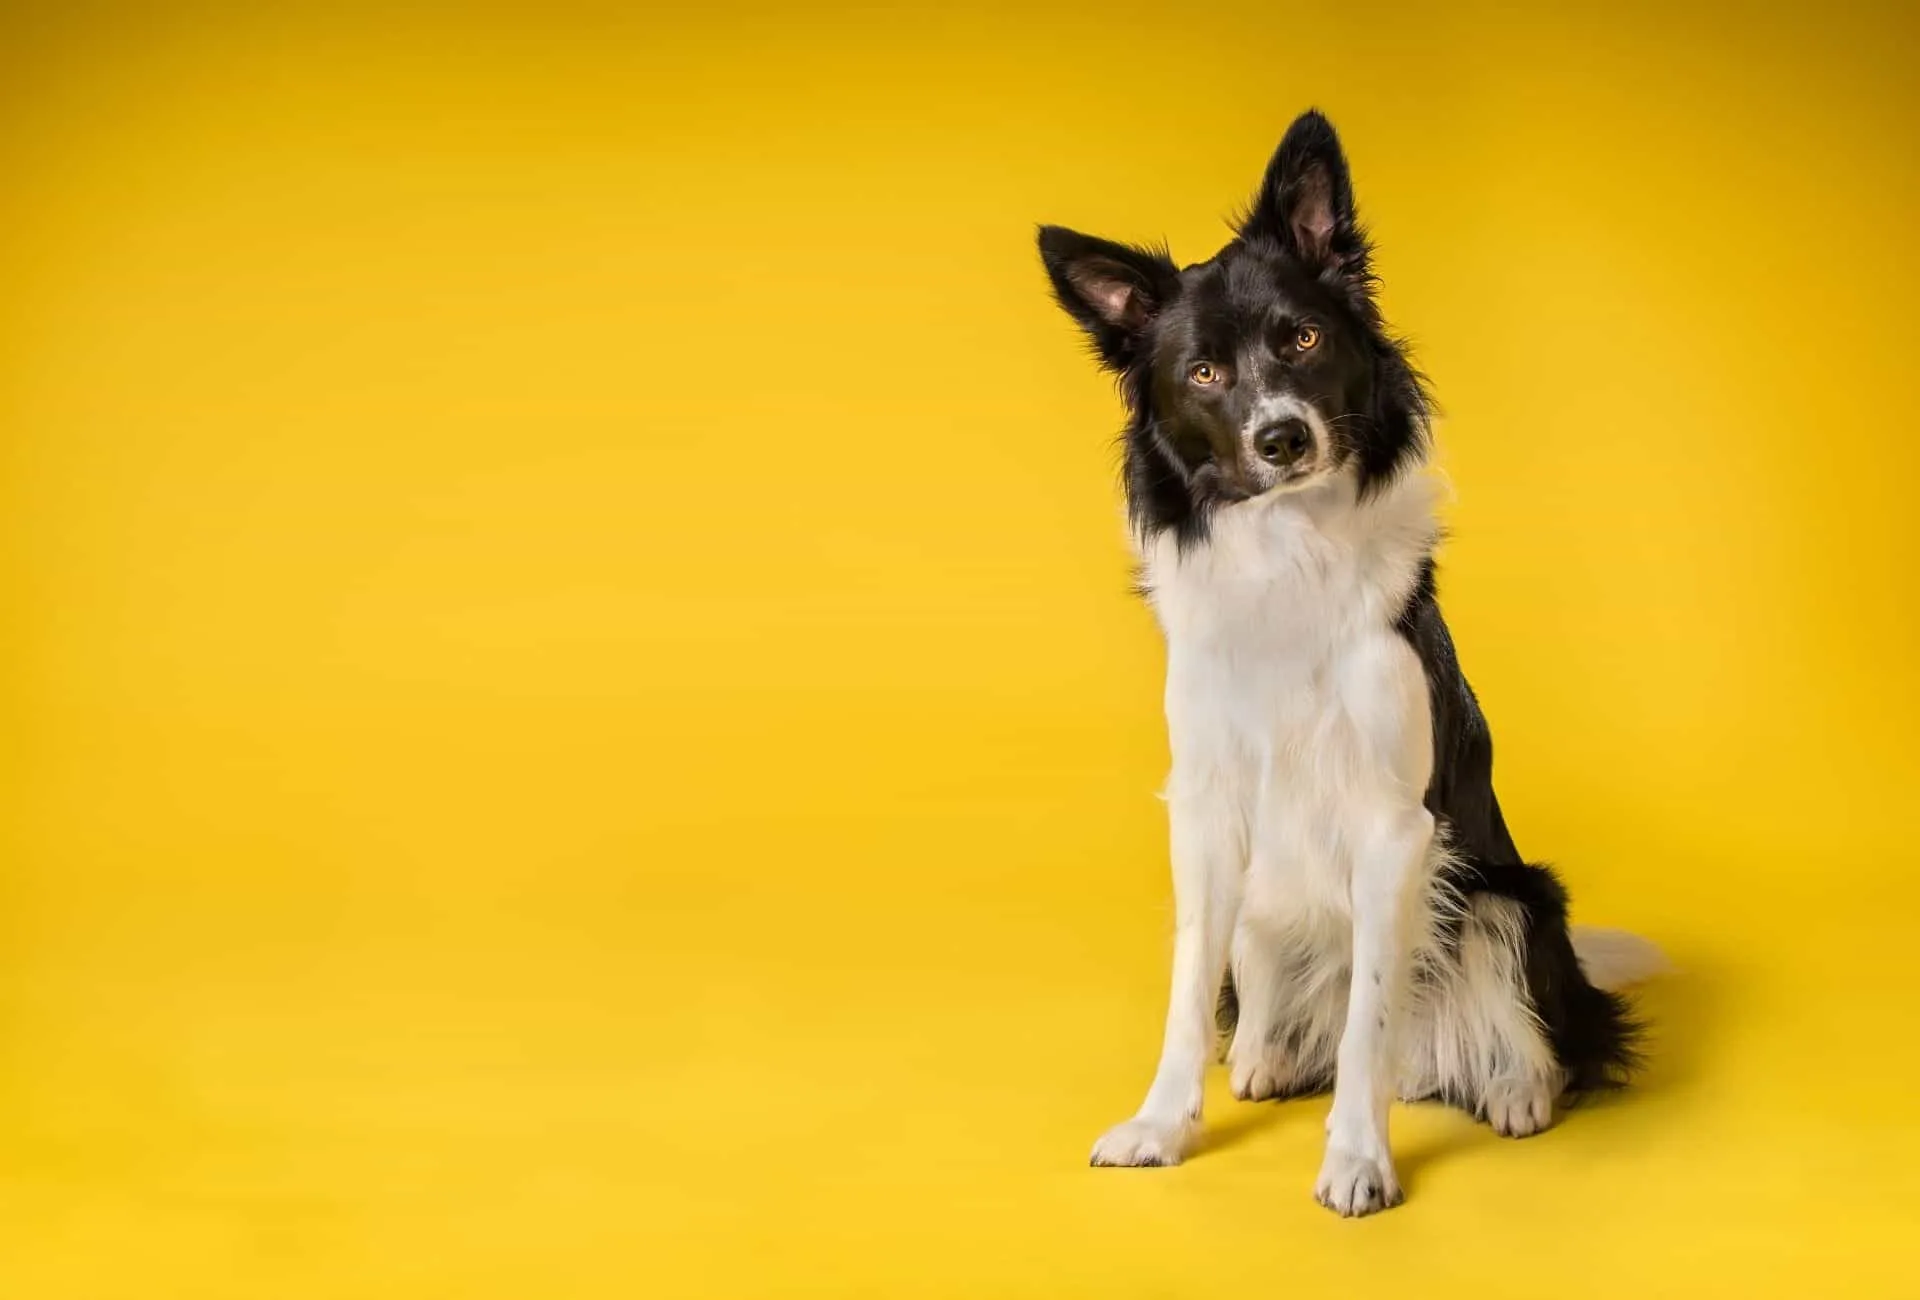 Black and white Border Collie on yellow background.